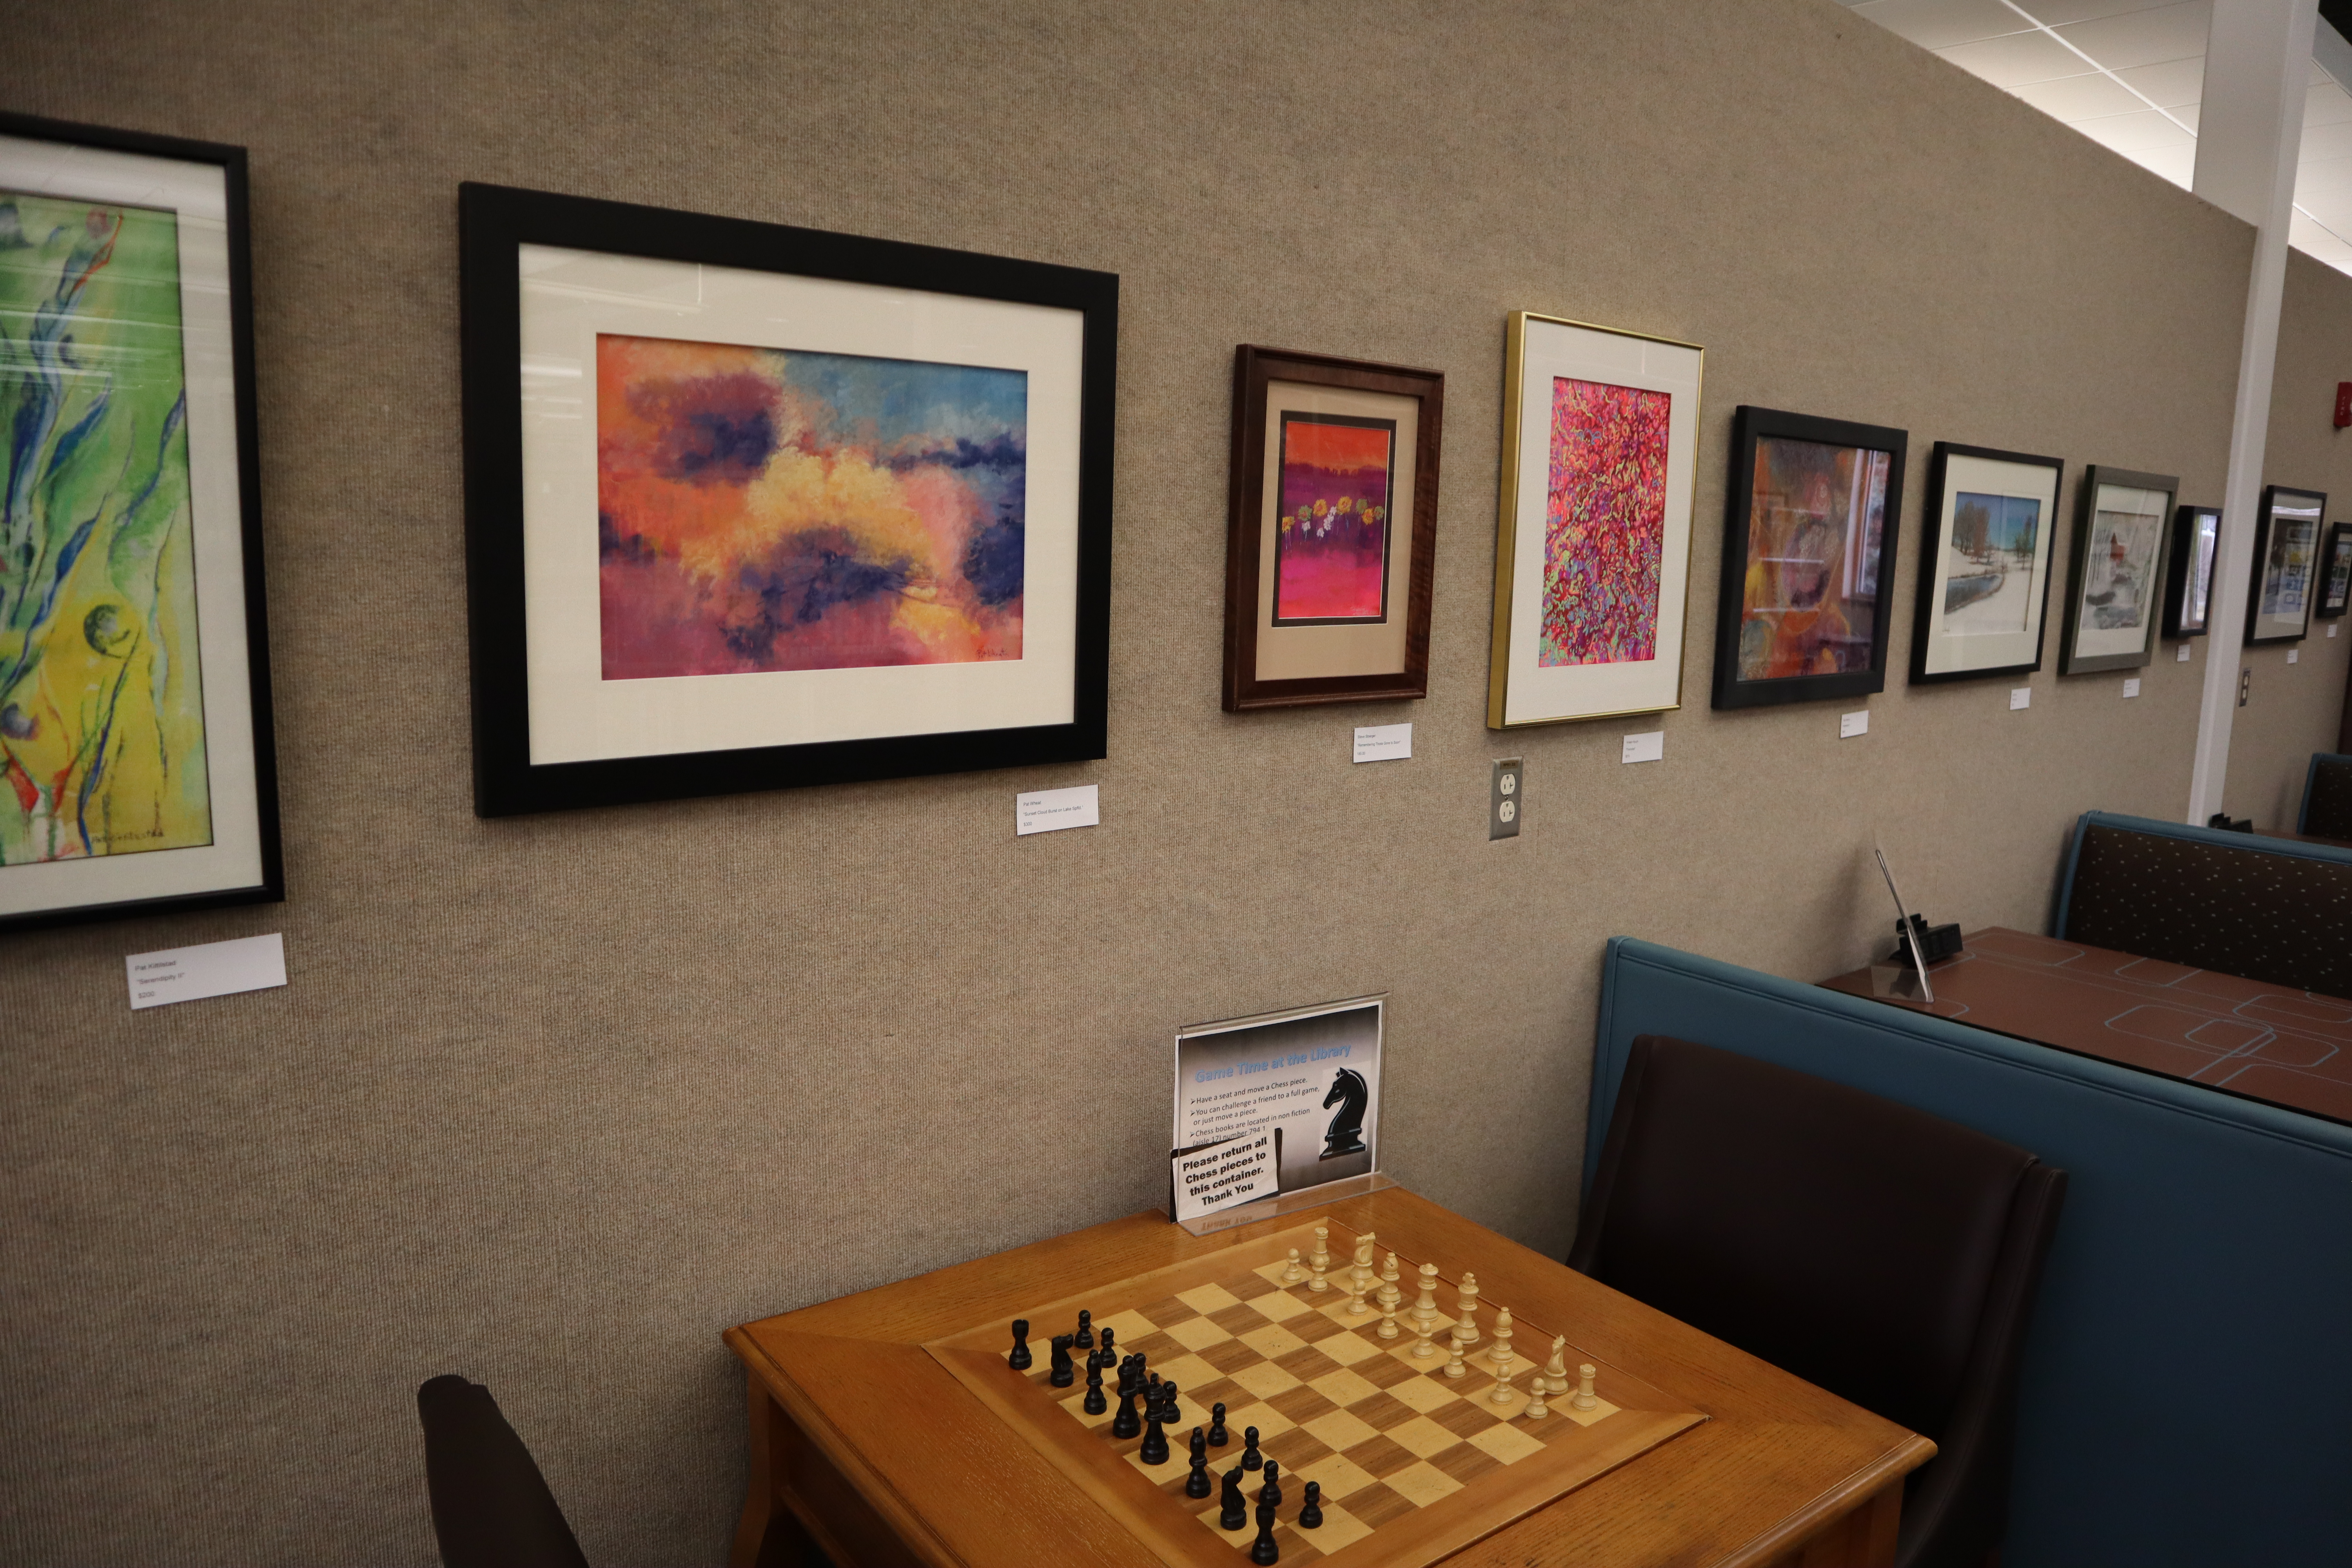 A long row of framed oil pastel paintings hanging on a wall above a seating area in the Library.